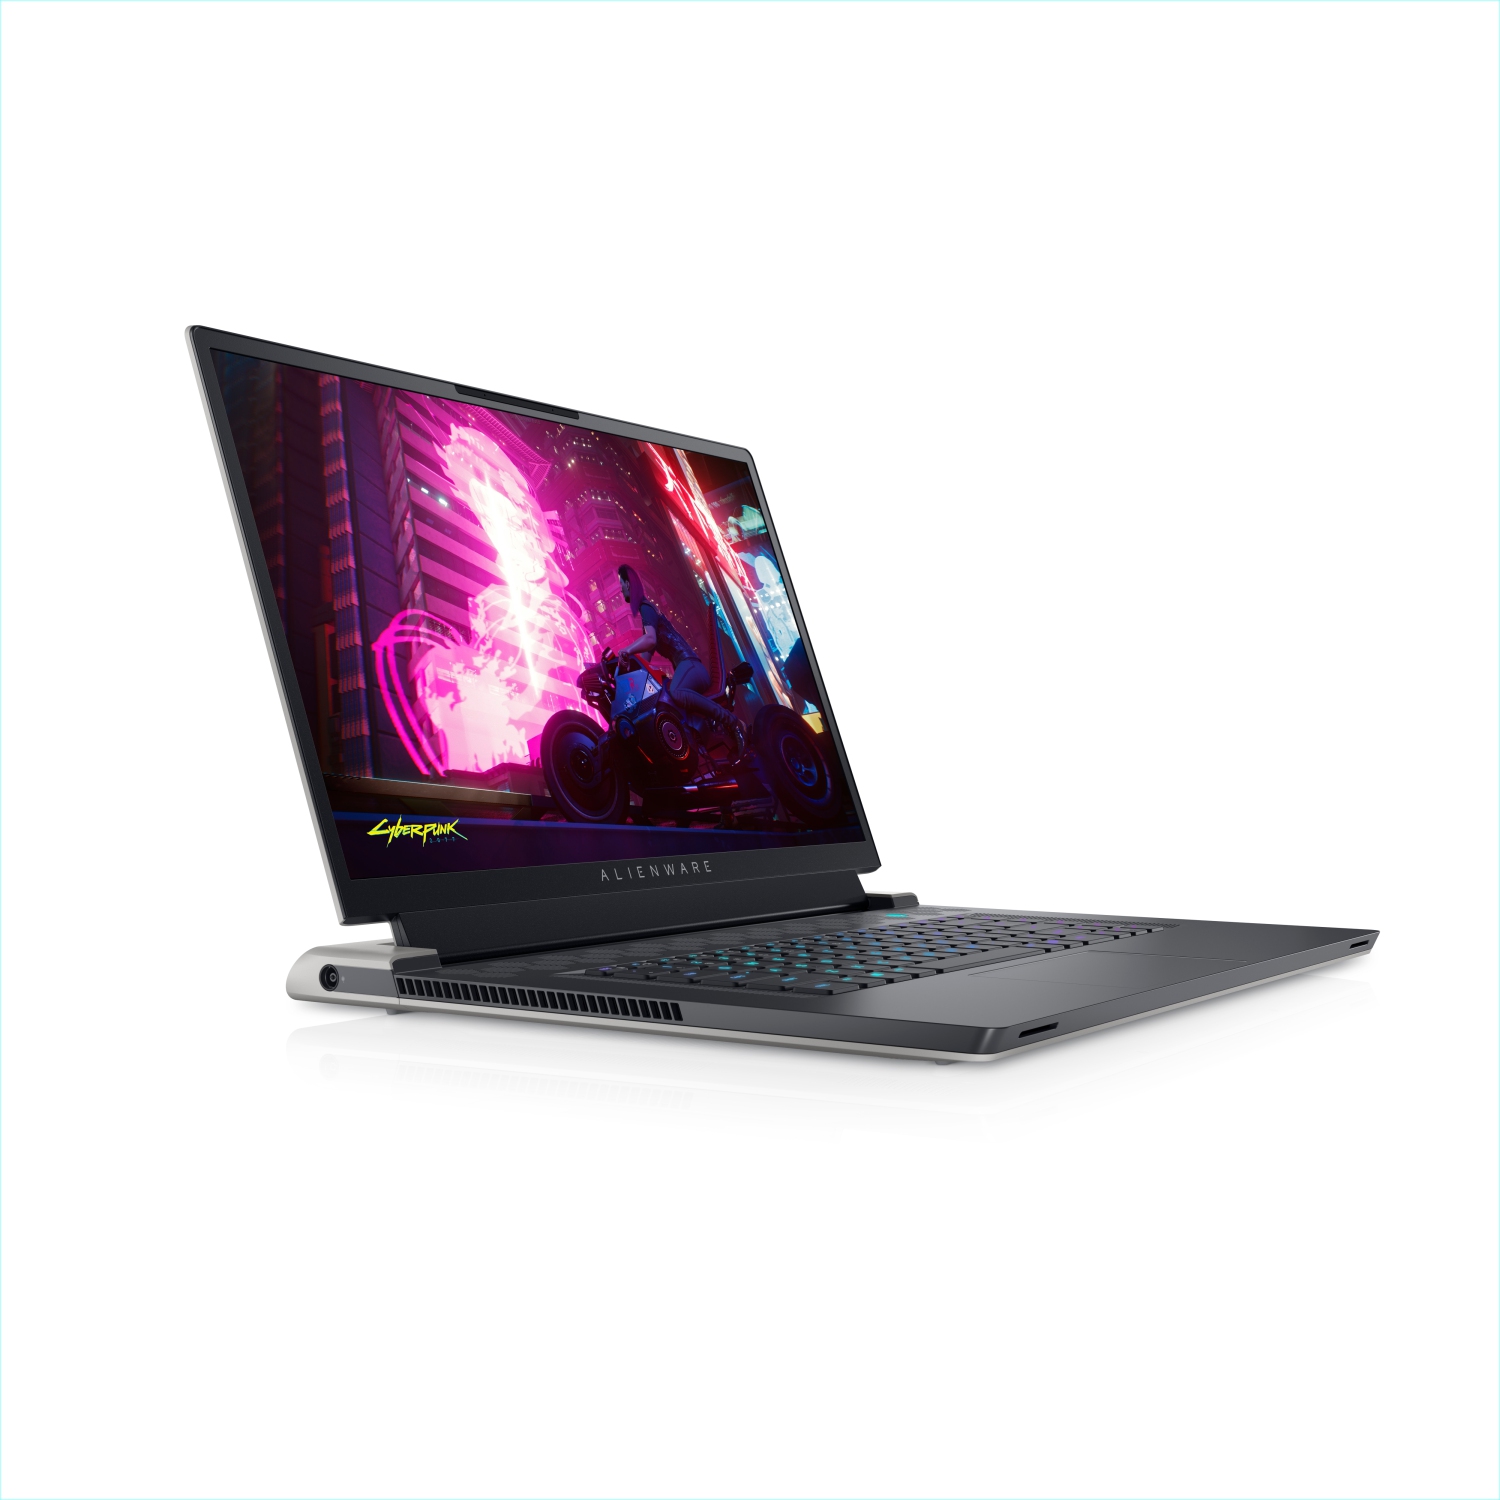 Refurbished (Excellent) – Dell Alienware X17 R1 Gaming Laptop (2021) | 17.3" FHD | Core i7 - 512GB SSD - 32GB RAM - RTX 3060 | 8 Cores @ 4.6 GHz - 11th Gen CPU - 12GB GDDR6